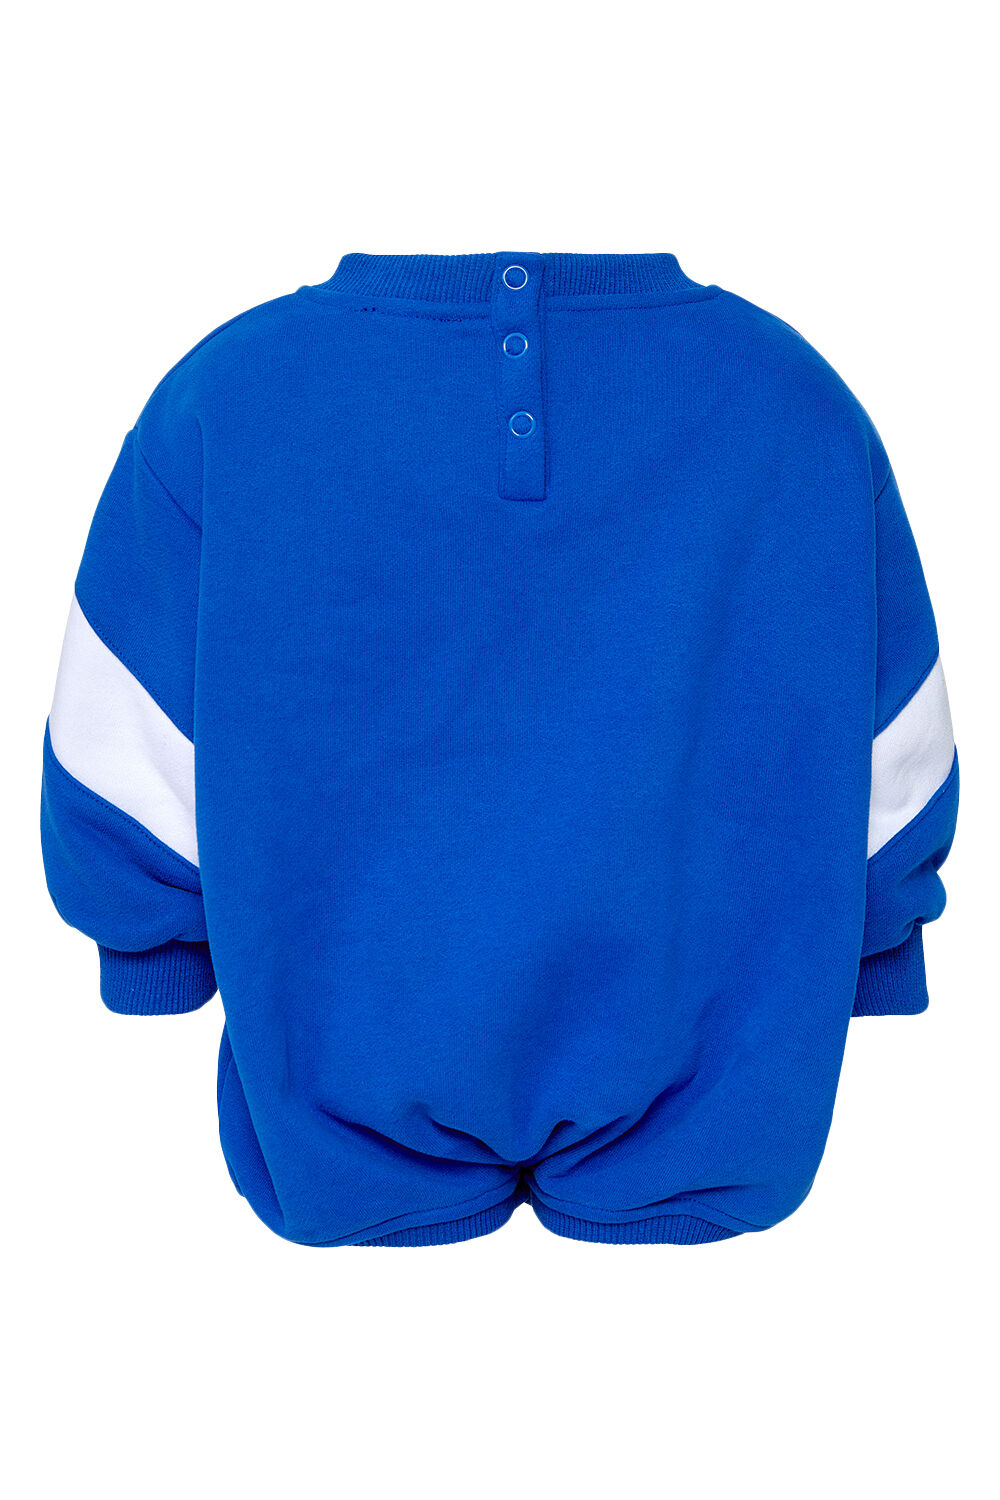 TRACK SWEATER GROW in colour DAZZLING BLUE